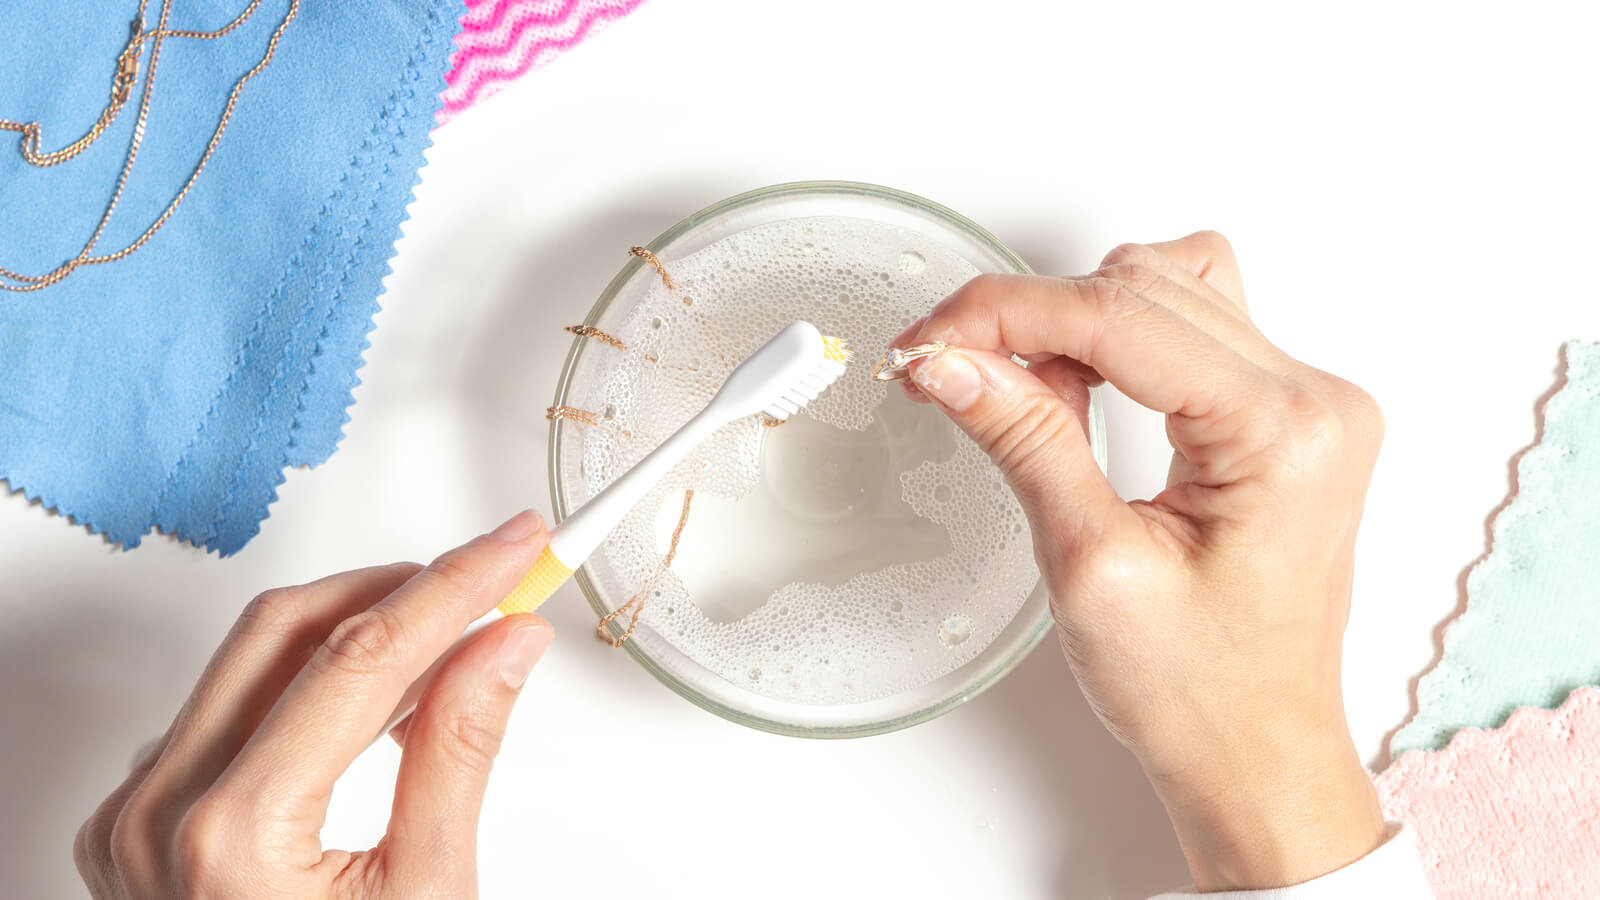 cleaning ring in bowl of soapy water with toothbrush